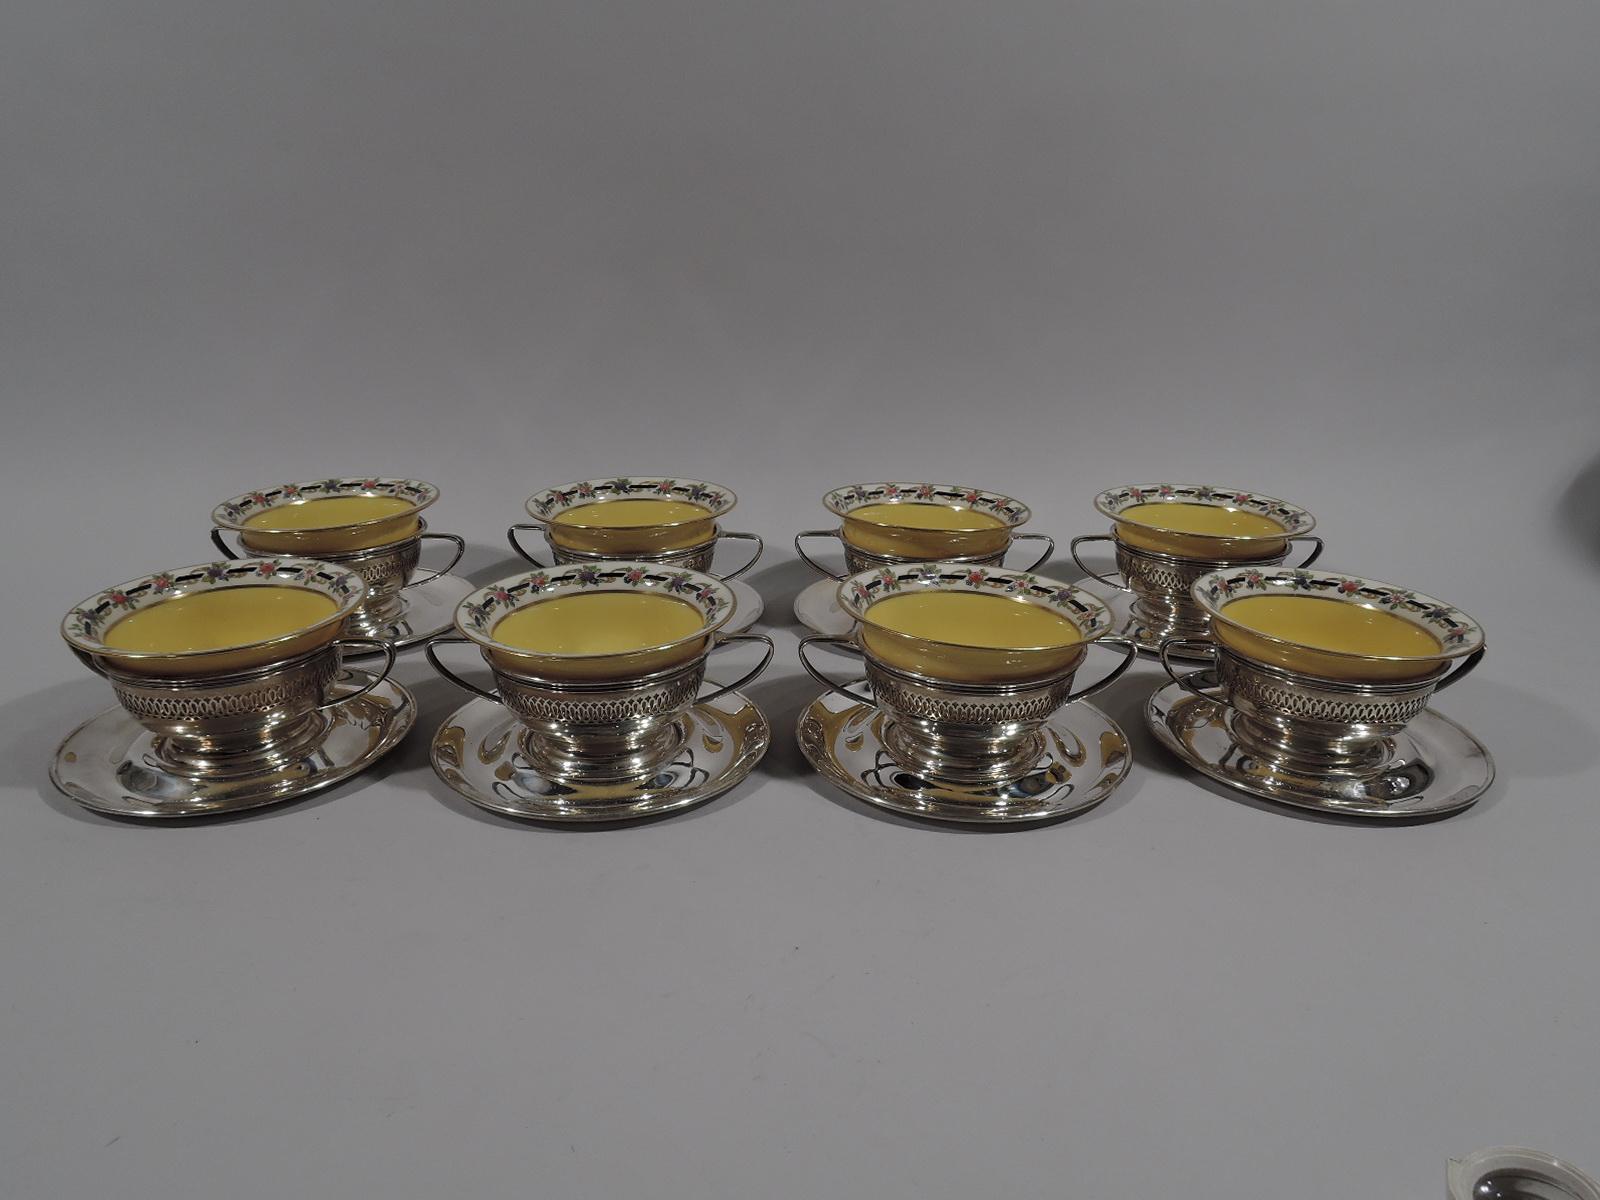 Set of 8 Edwardian sterling silver bouillon holders and plates. Made by Gorham in Providence in 1919. Each holder: Round and curved with pierced border, elongated scroll bracket handles, and spread foot. Each plate: Well and concave surround. Plates